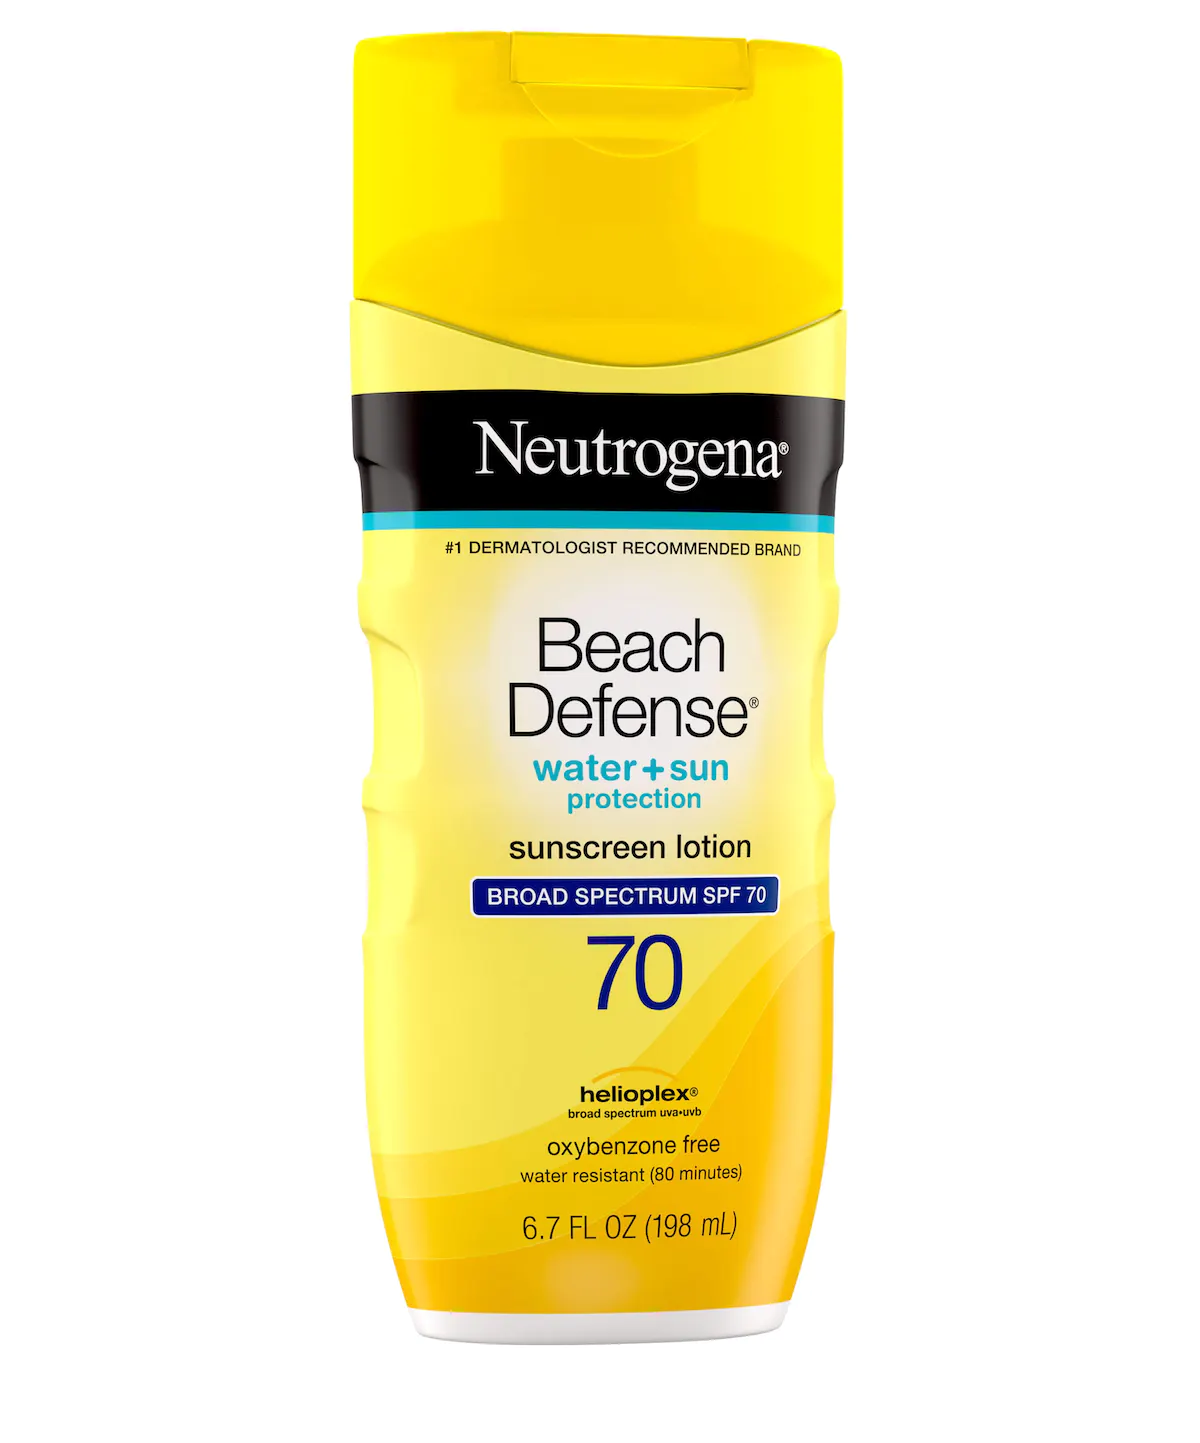 Neutrogena Beach Defense Water Resistant Sunscreen Lotion with Broad Spectrum SPF 70